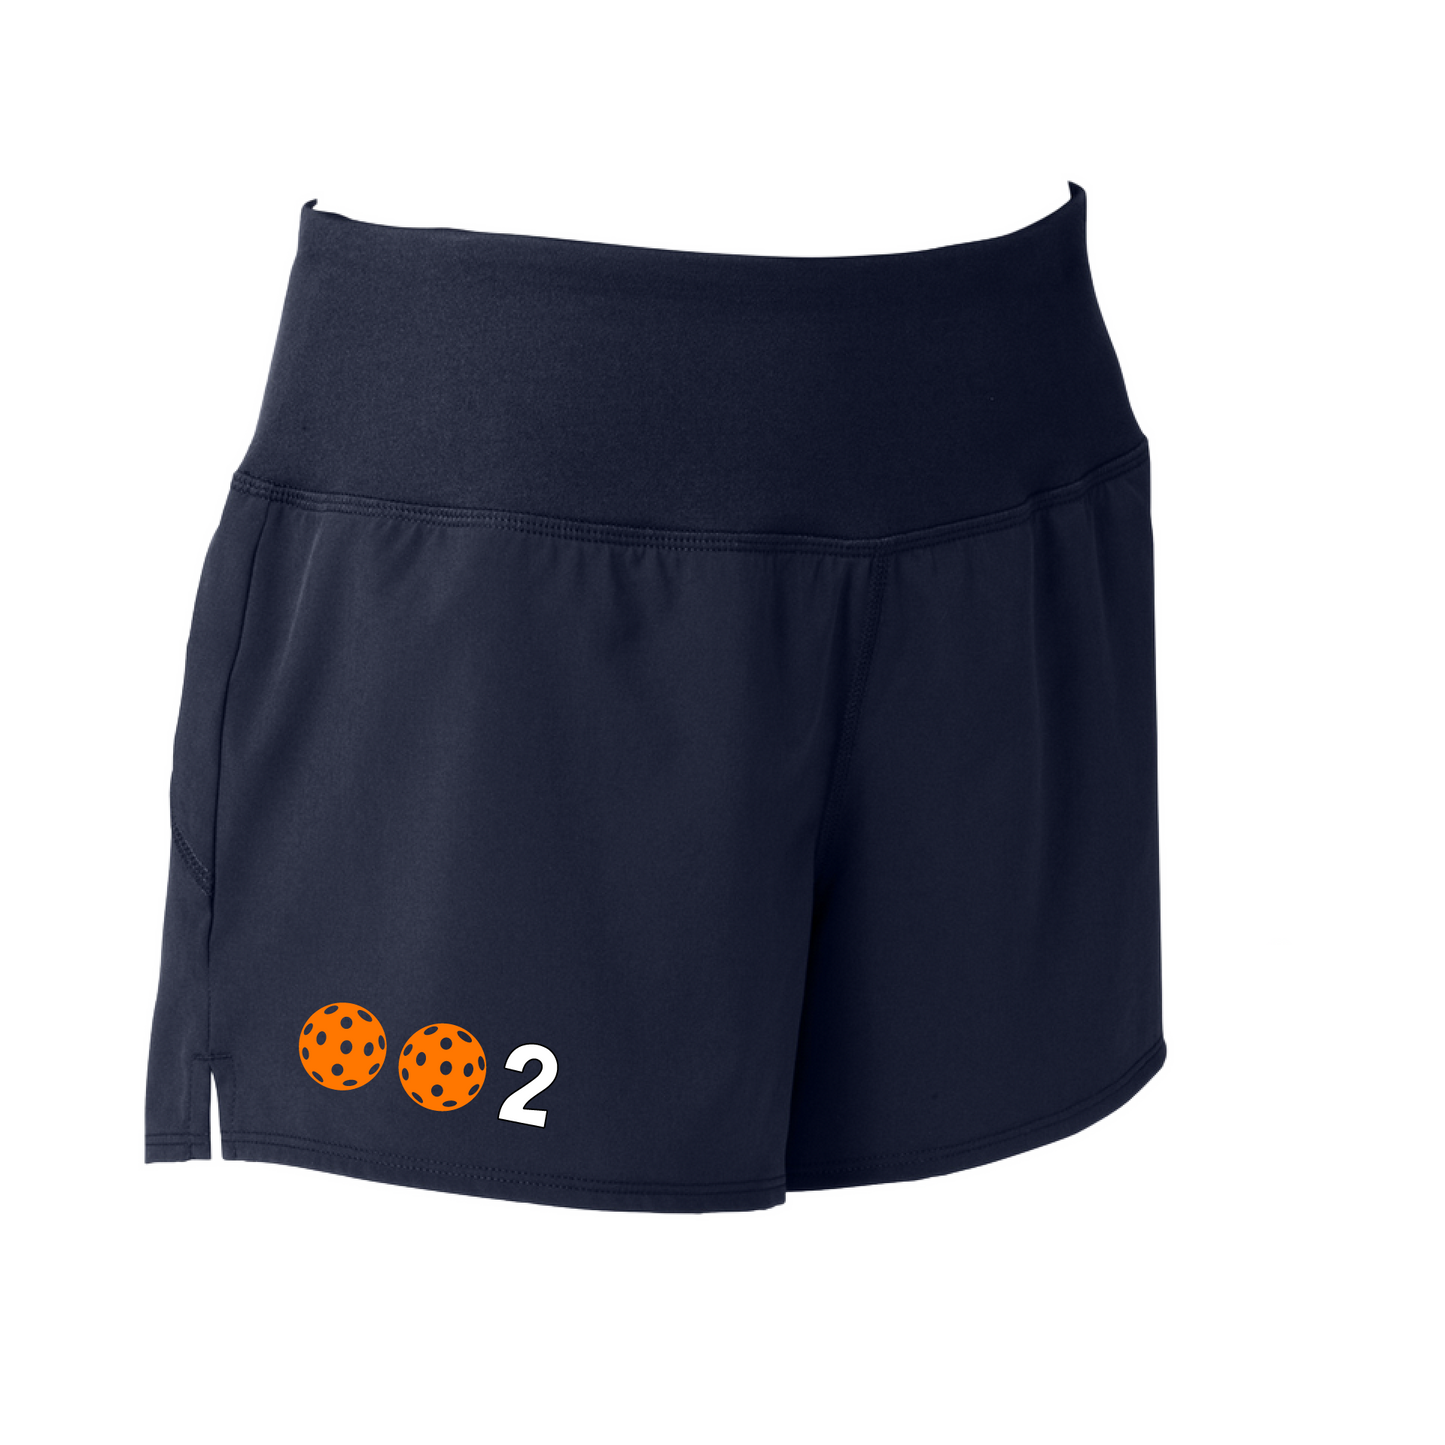 Designs: 002 with customizable Pickleballs (Cyan, Orange, Purple, Rainbow.)  Sport Tek women’s repeat shorts come with built-in cell phone pocket on the exterior of the waistband. You can also feel secure knowing that no matter how strenuous the exercise, the shorts will remain in place (it won’t ride up!). These shorts are extremely versatile and trendy. Transition from the Pickleball court to running errands smoothly.